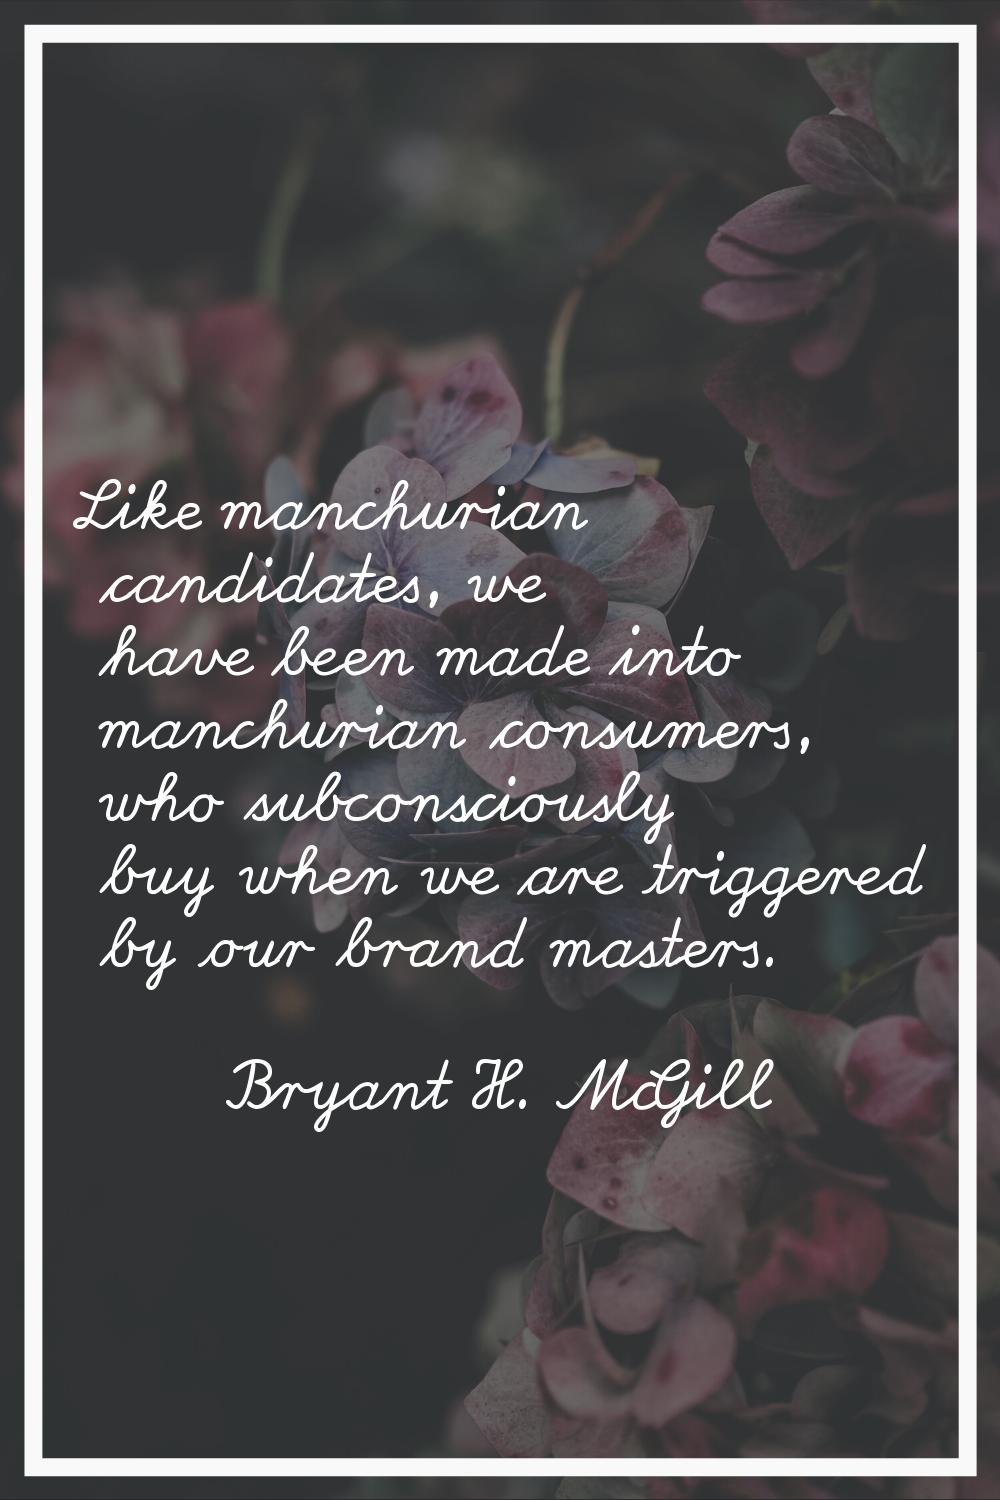 Like manchurian candidates, we have been made into manchurian consumers, who subconsciously buy whe